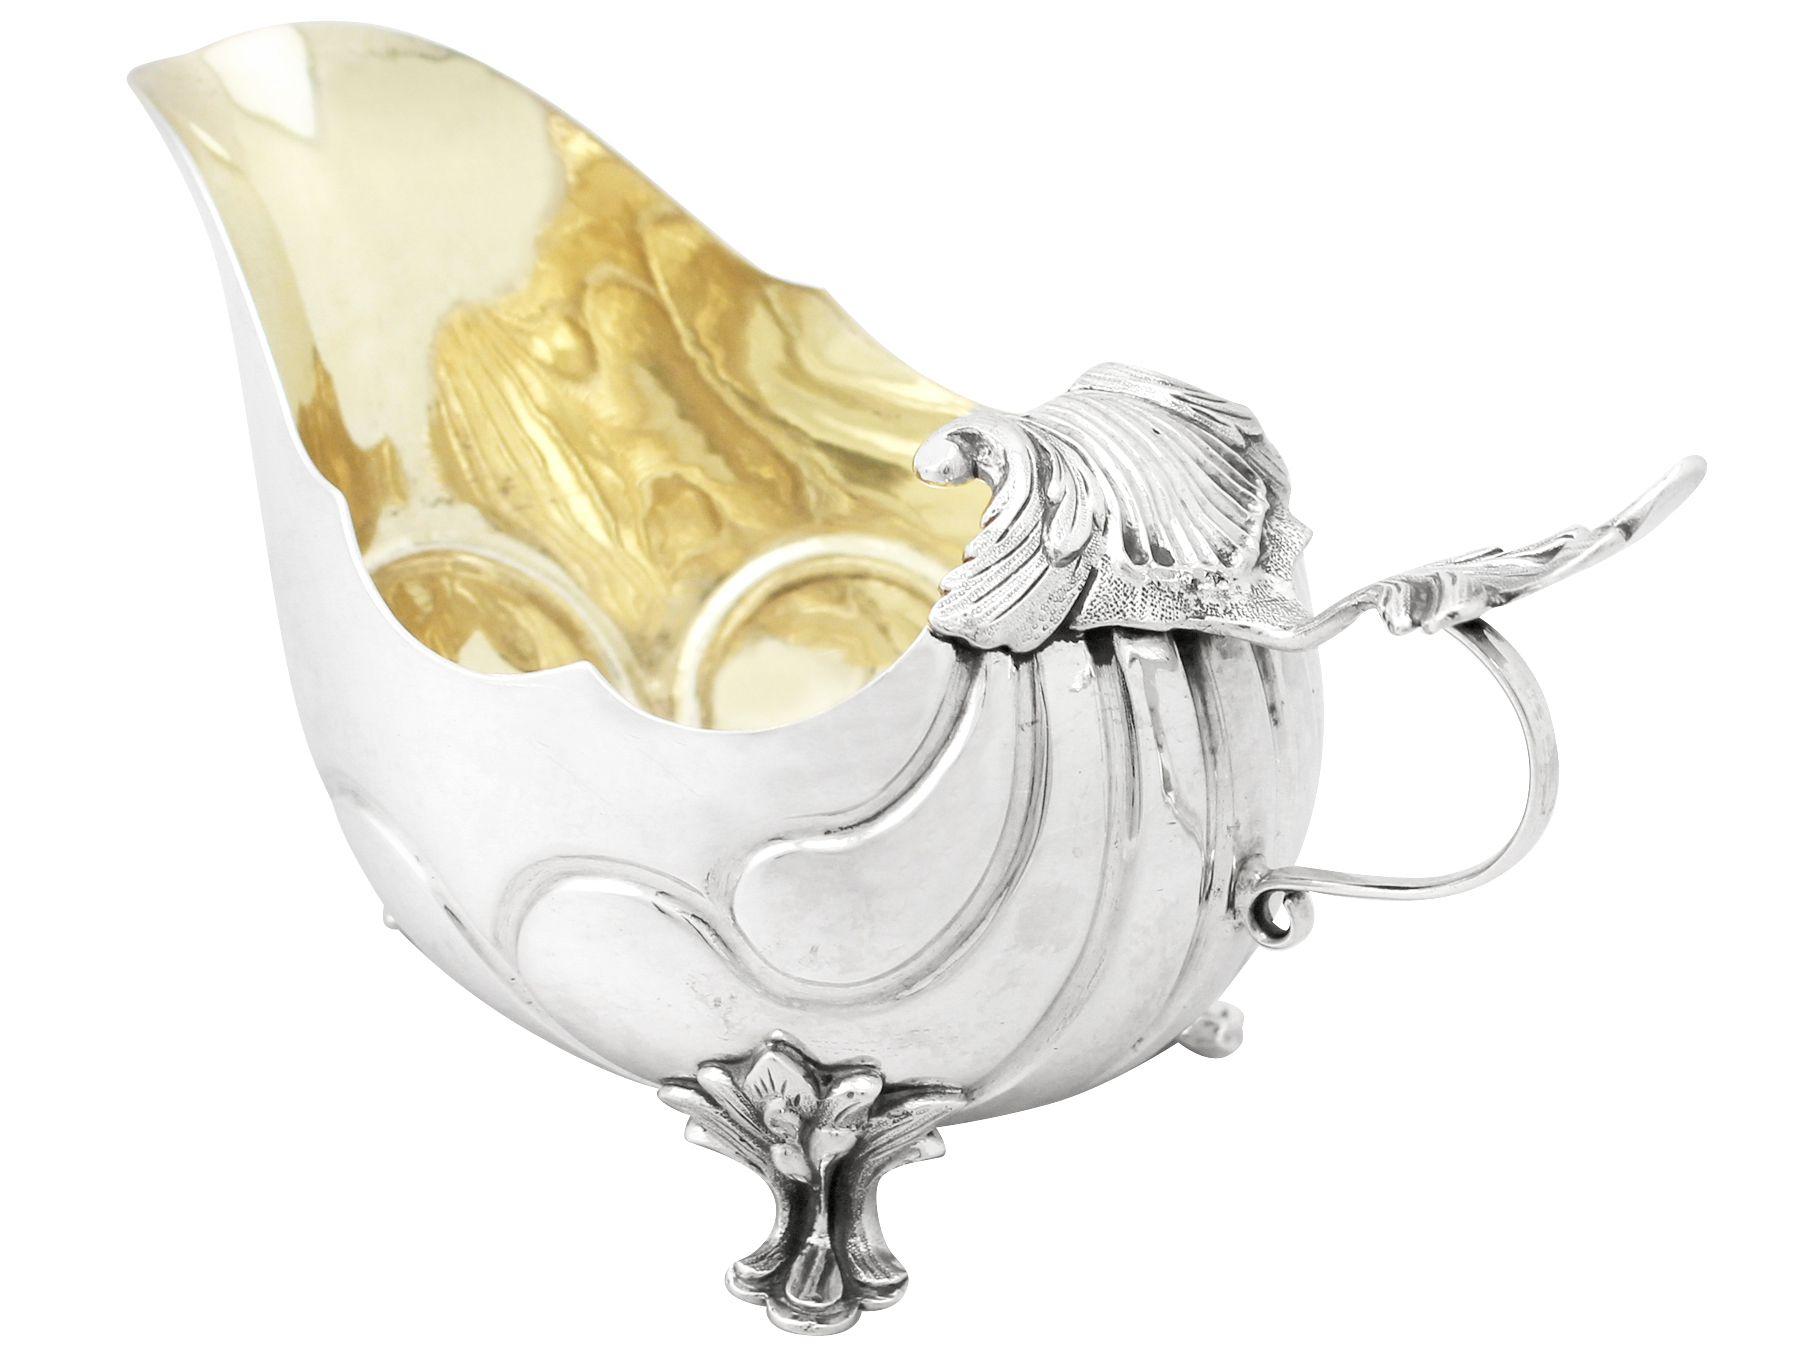 Antique Swedish Silver Cream Boat / Gravy Boat by Wigren In Excellent Condition For Sale In Jesmond, Newcastle Upon Tyne